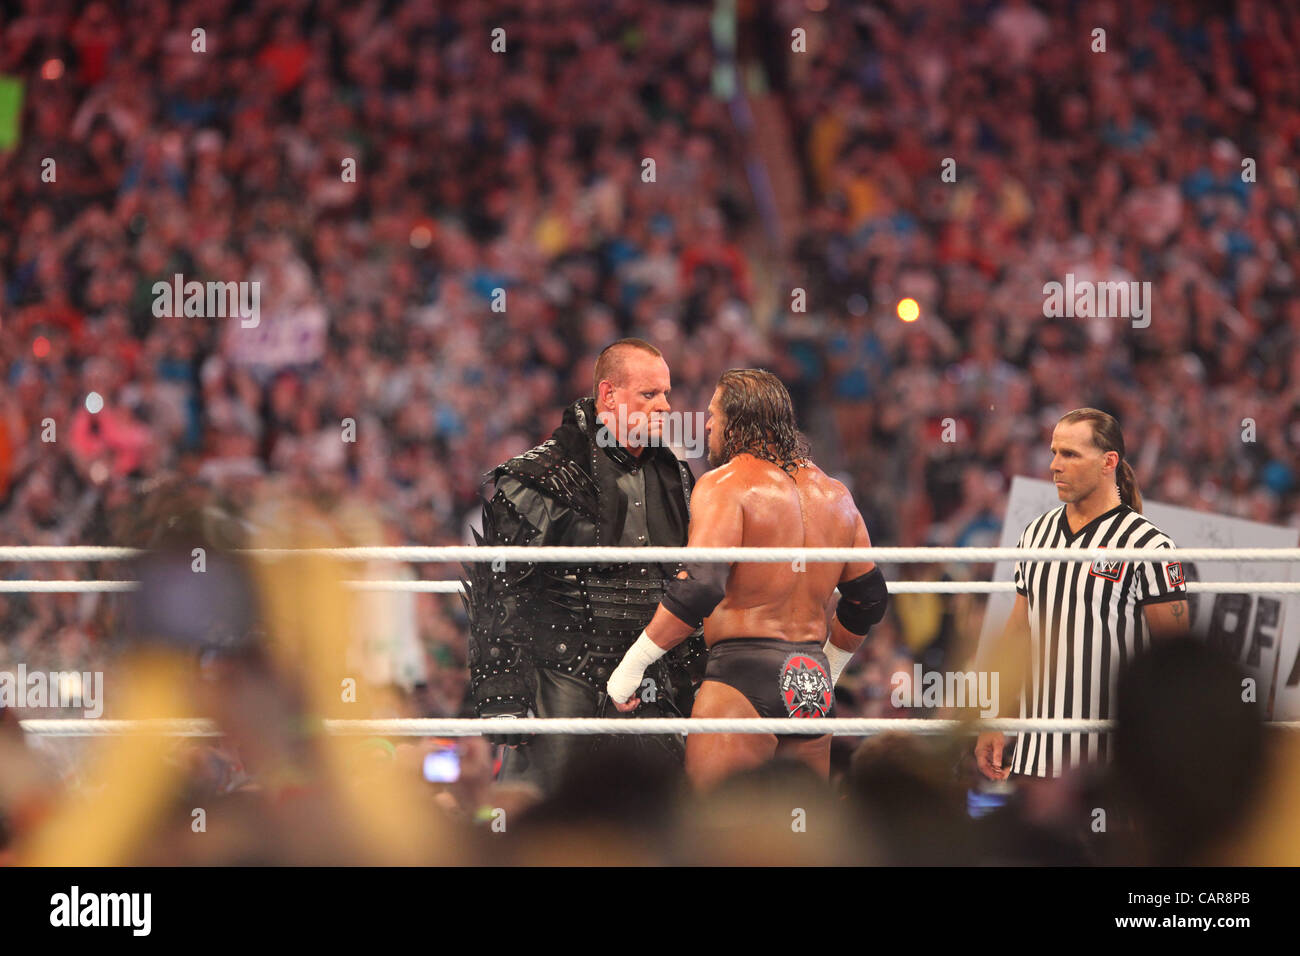 WWE legends The Undertaker wrestled Triple H at Wrestlemania 28 in Miami, FL at Sun Life Stadium. WWE Hall of Famer Shawn Michaels served as the special referee. The Undertaker won, advancing his streak to 20-0 at Wrestlemania events. Stock Photo